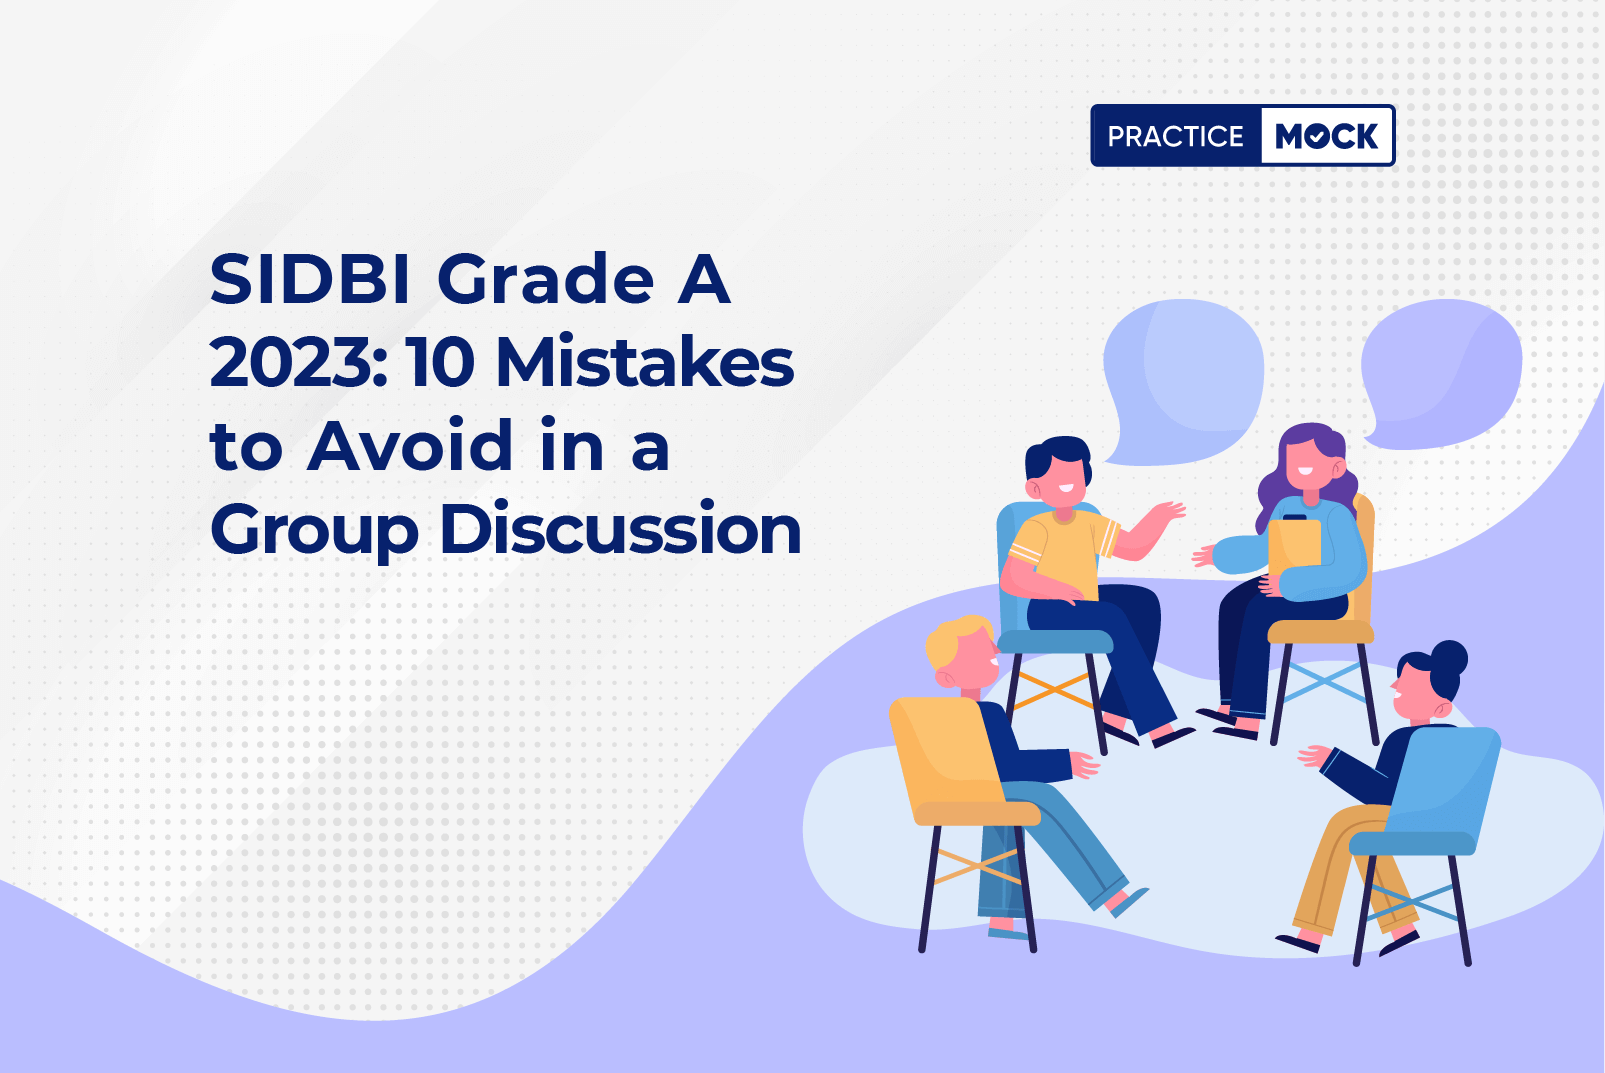 SIDBI Grade A 2023 10 Mistakes to Avoid in a Group Discussion